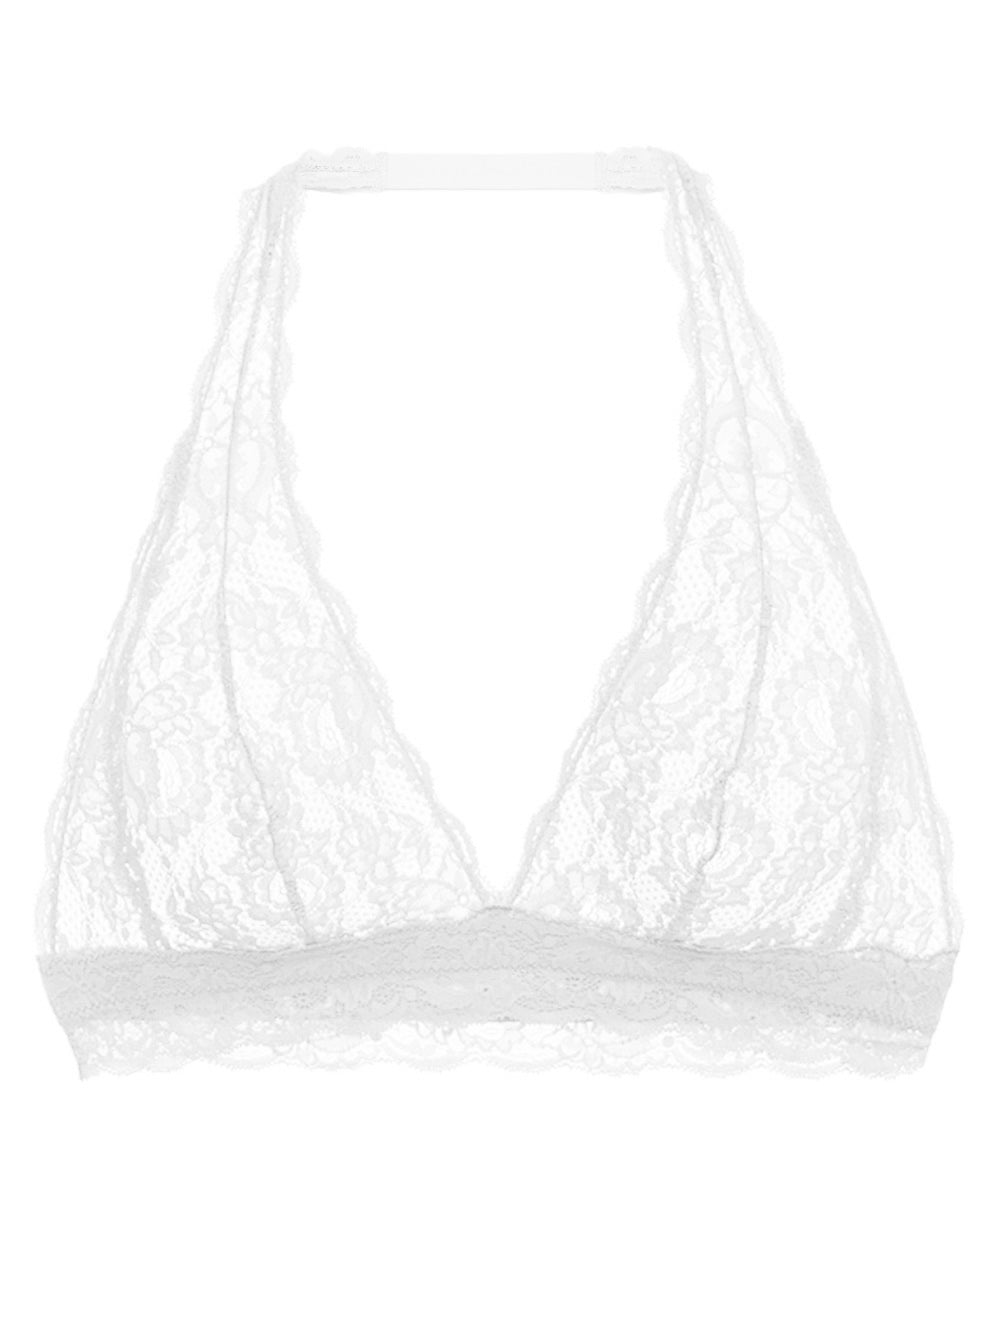 Lace Bralettes  Triangle & Halter Lace Bralette Tops